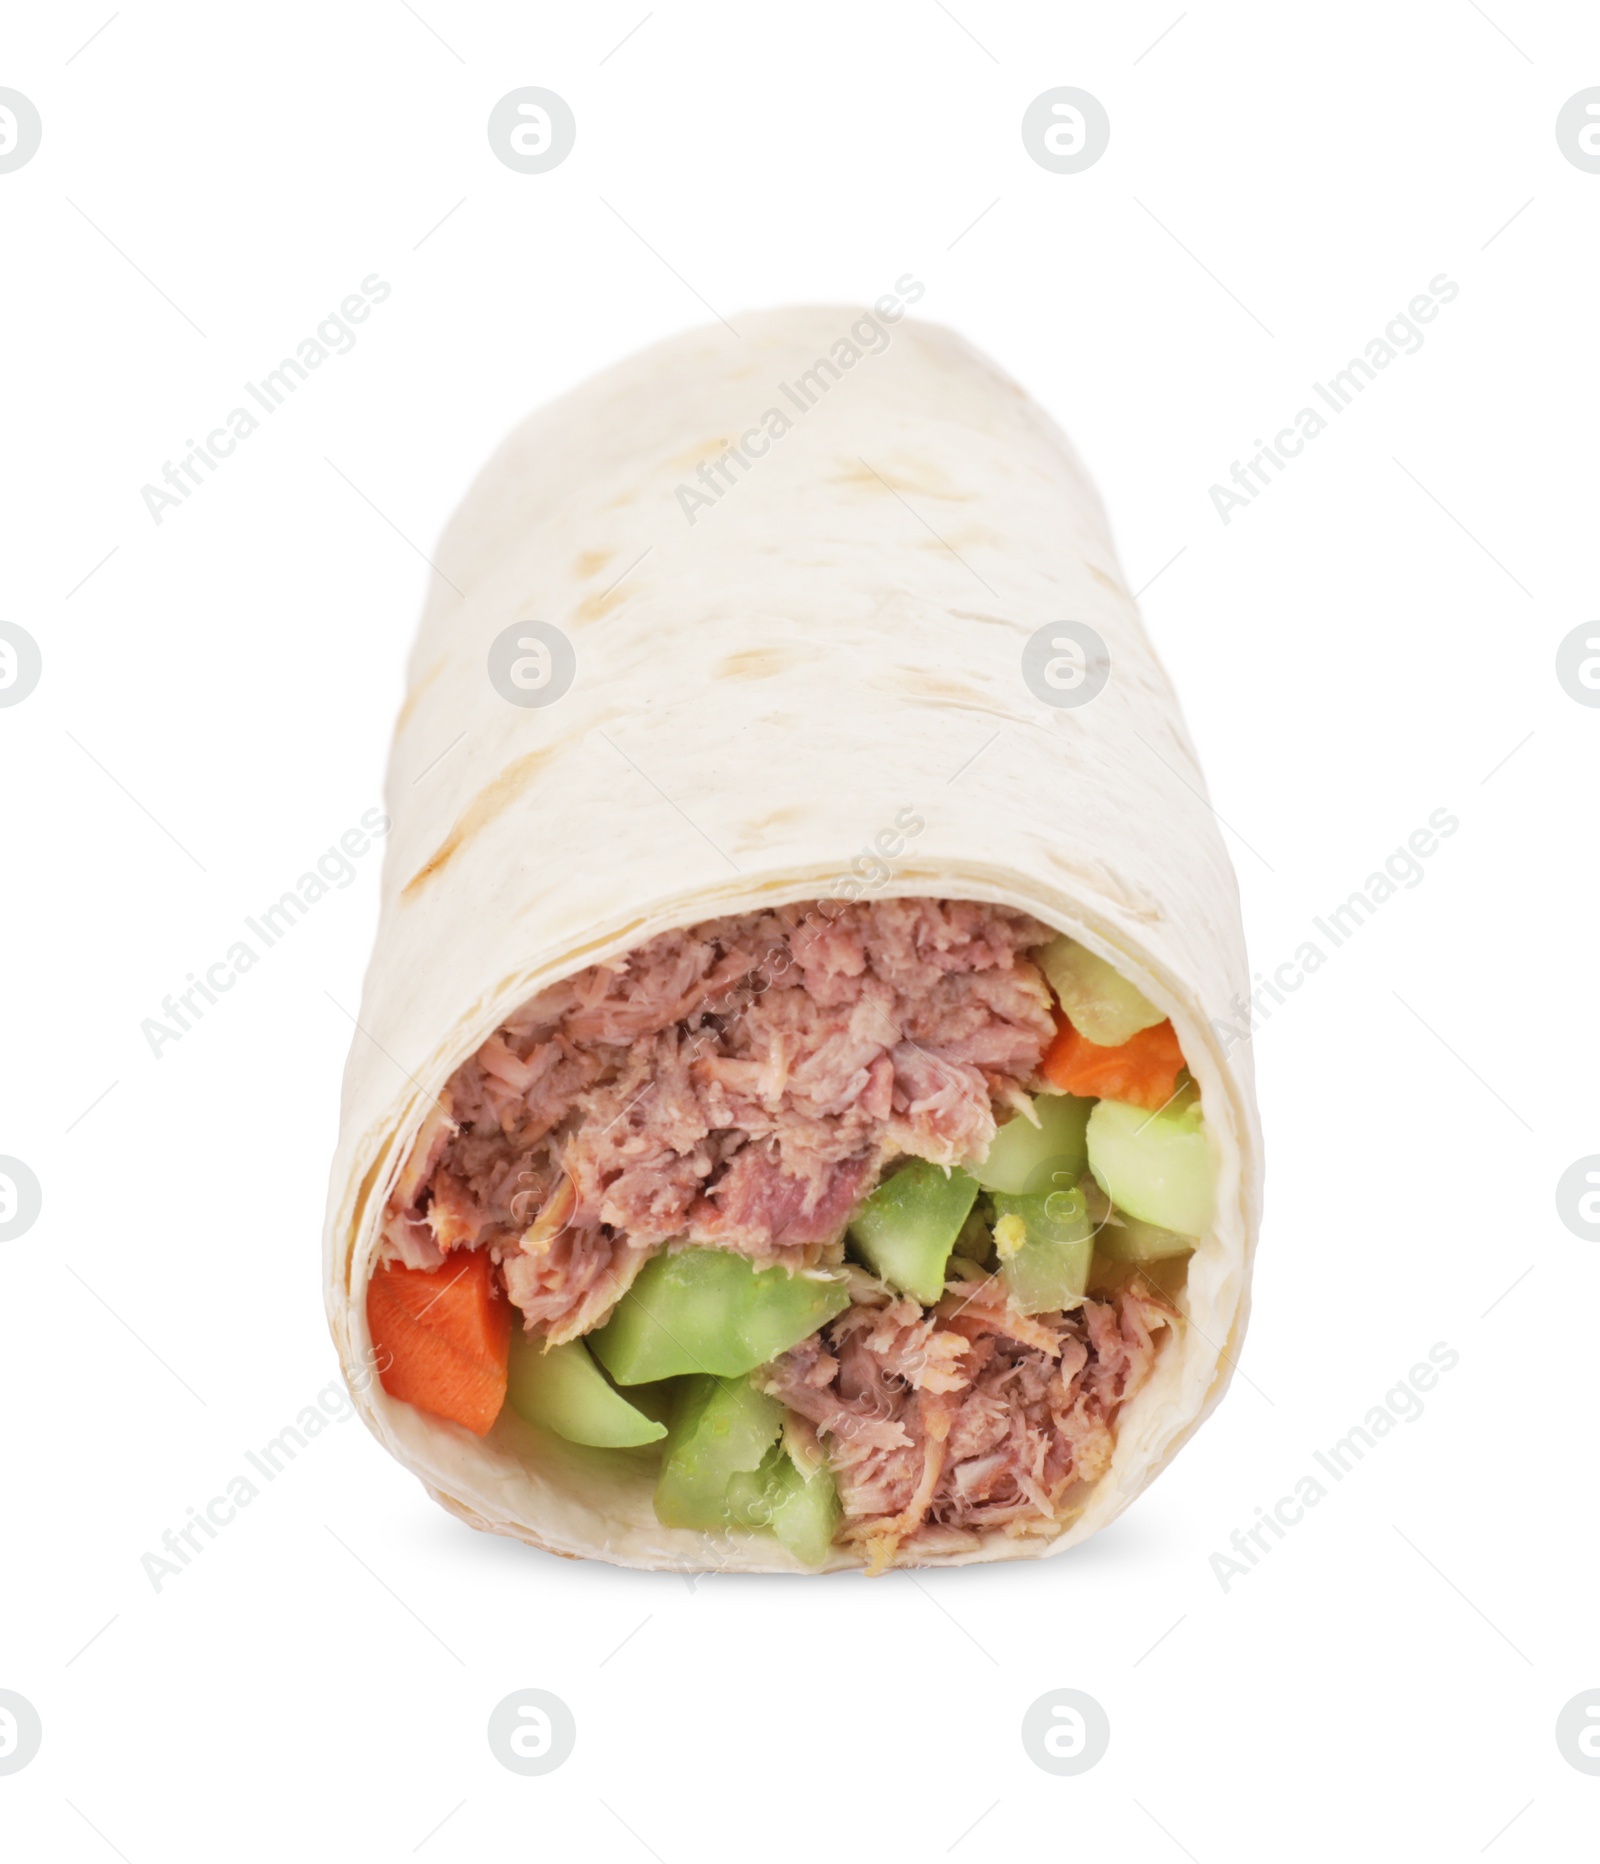 Photo of Delicious tortilla wrap with tuna and vegetables isolated on white